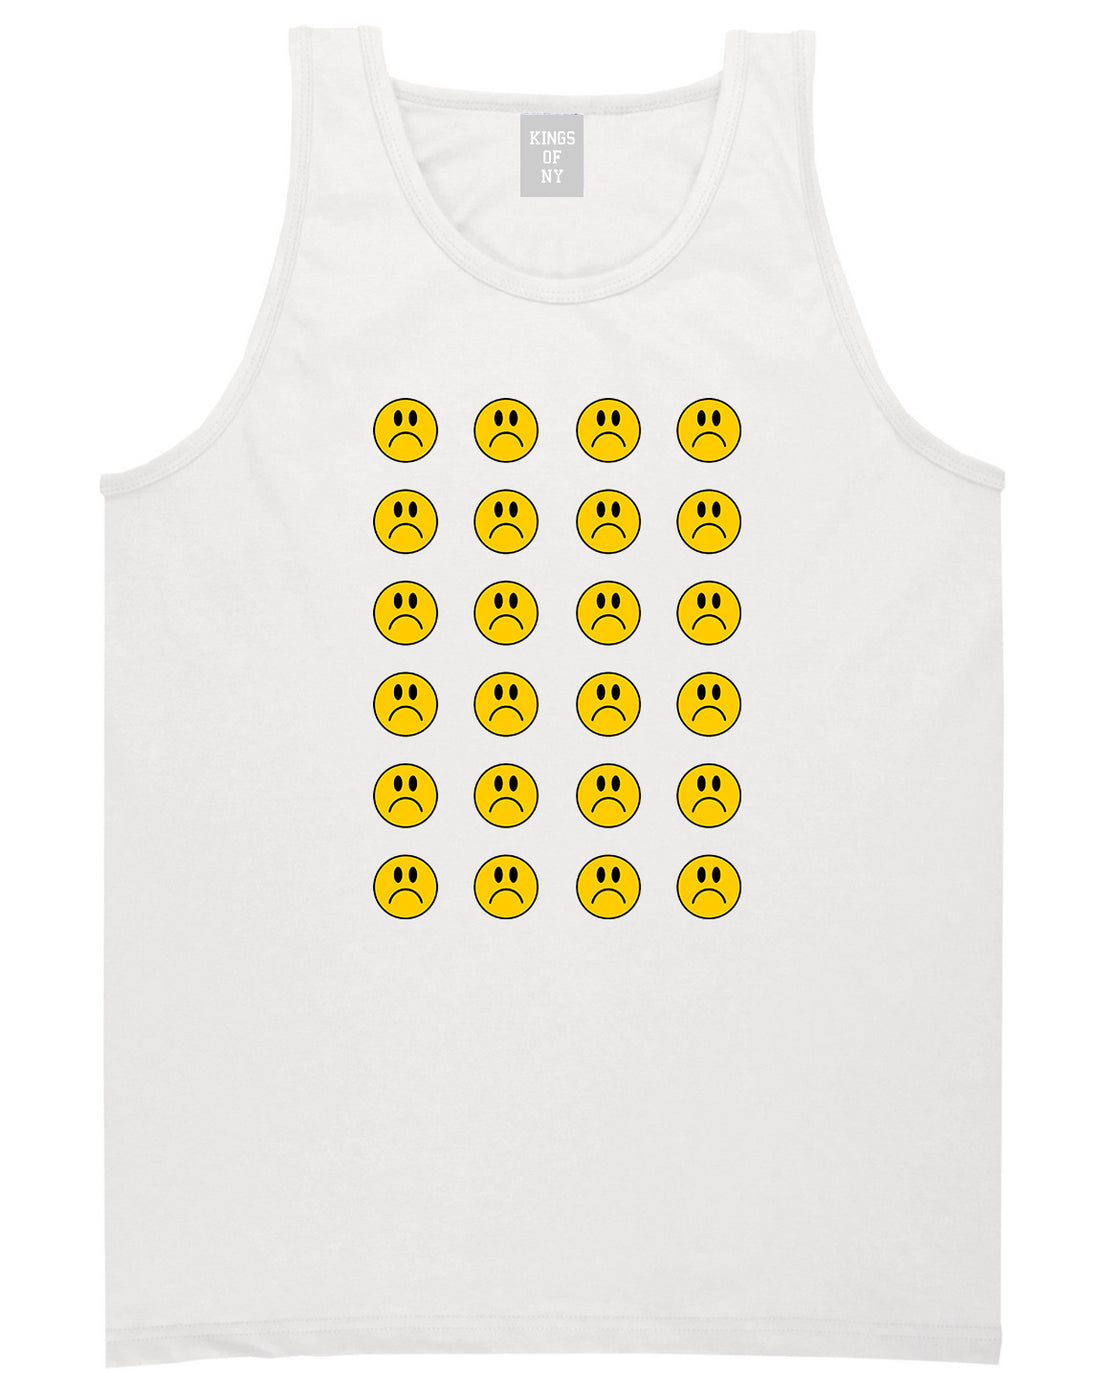 All Over Sad Face Mens Tank Top Shirt White by Kings Of NY